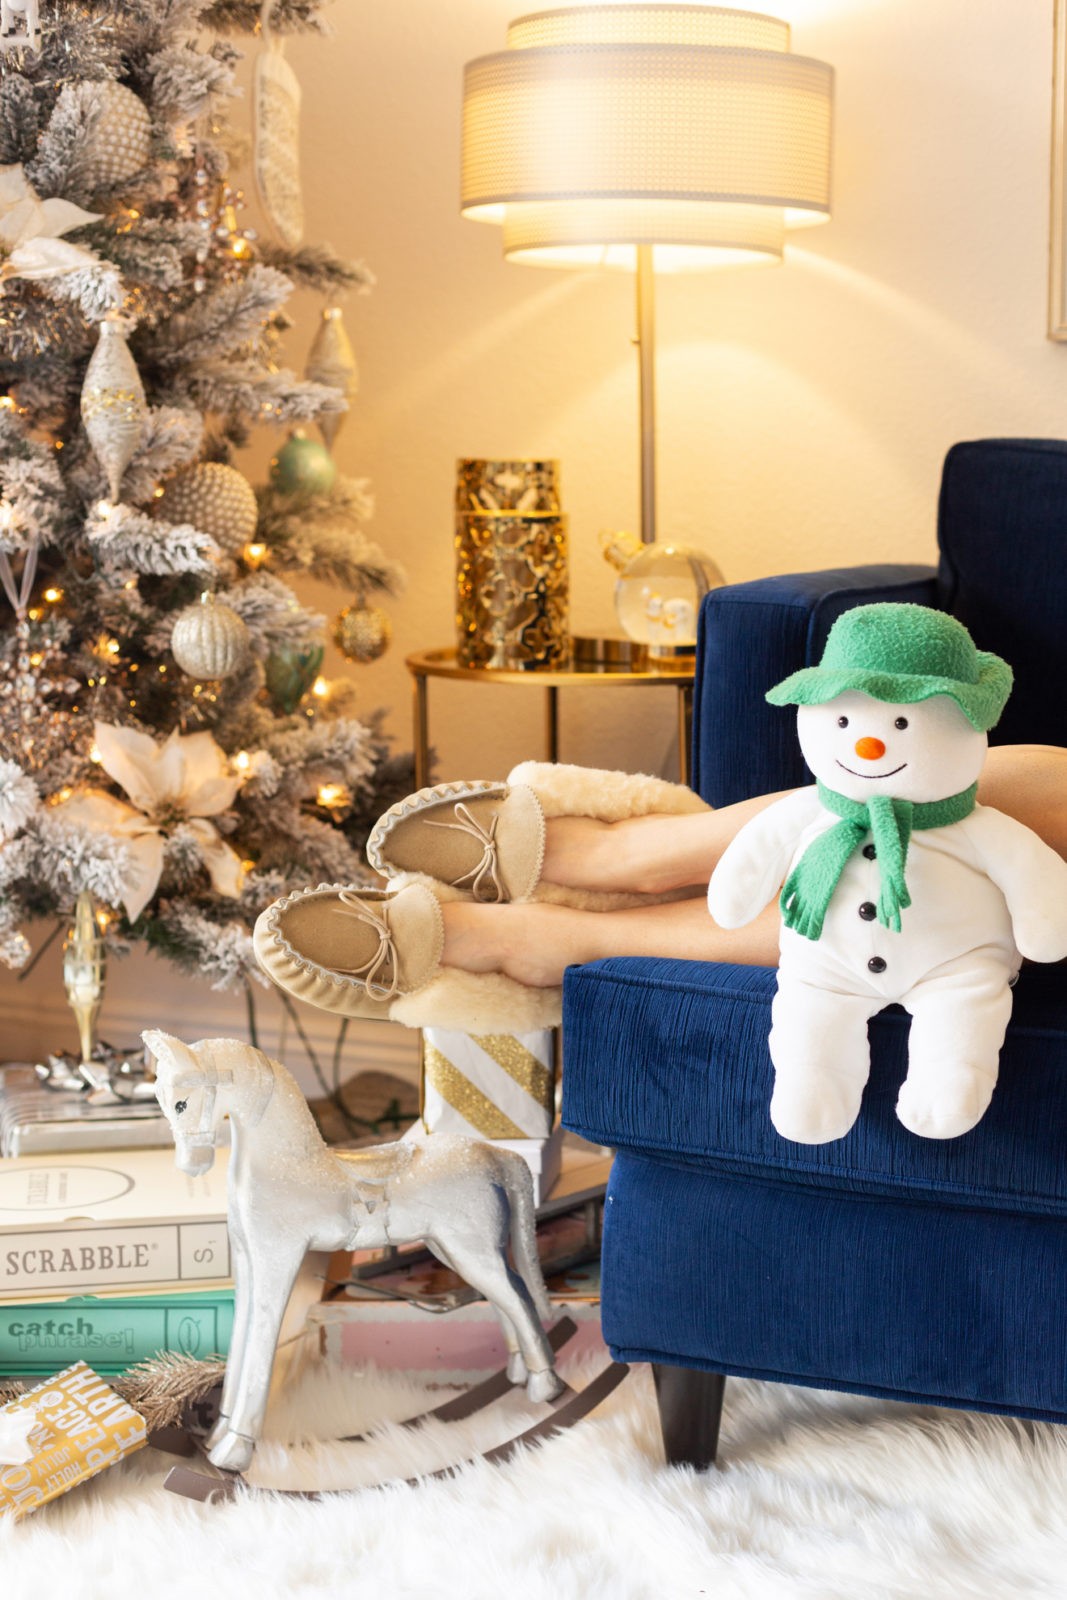 Gift Ideas for the Woman Who Has Everything by Lifestyle Blogger Laura Lily, Celtic & Co Shearling Sheep Slippers, Luxurious Gift Ideas for Her | Gift Ideas for the Woman Who Has Everything by popular Los Angeles life and style blogger, Laura Lily: image of a stuffed snowman sitting on a blue ottoman. 